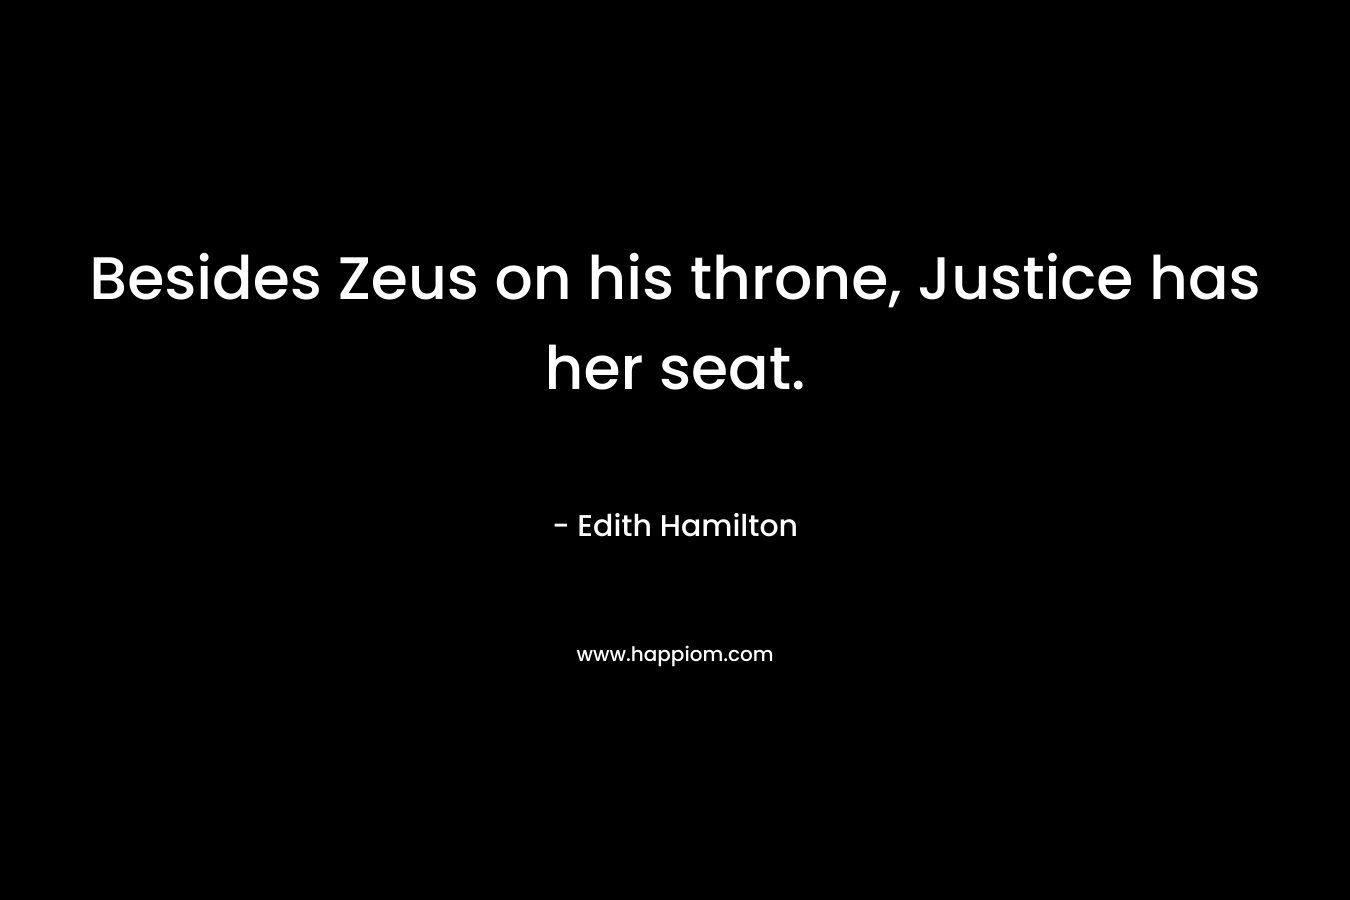 Besides Zeus on his throne, Justice has her seat. – Edith Hamilton